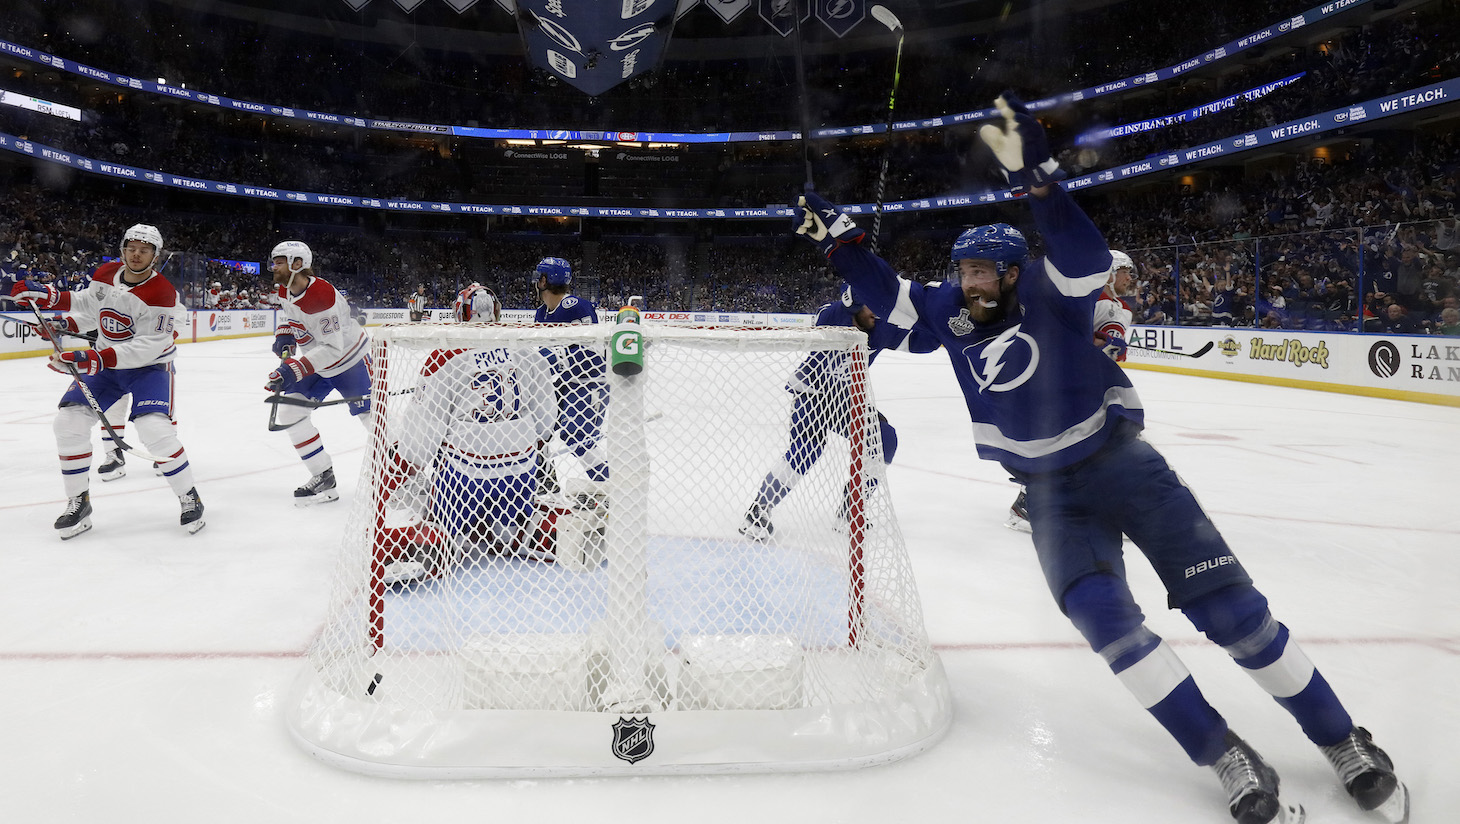 TAMPA, FLORIDA - JUNE 28: Victor Hedman #77 of the Tampa Bay Lightning celebrates a goal by Yanni Gourde past Carey Price #31 of the Montreal Canadiens during the third period in Game One of the 2021 NHL Stanley Cup Final at Amalie Arena on June 28, 2021 in Tampa, Florida. (Photo by Mike Carlson/Getty Images)